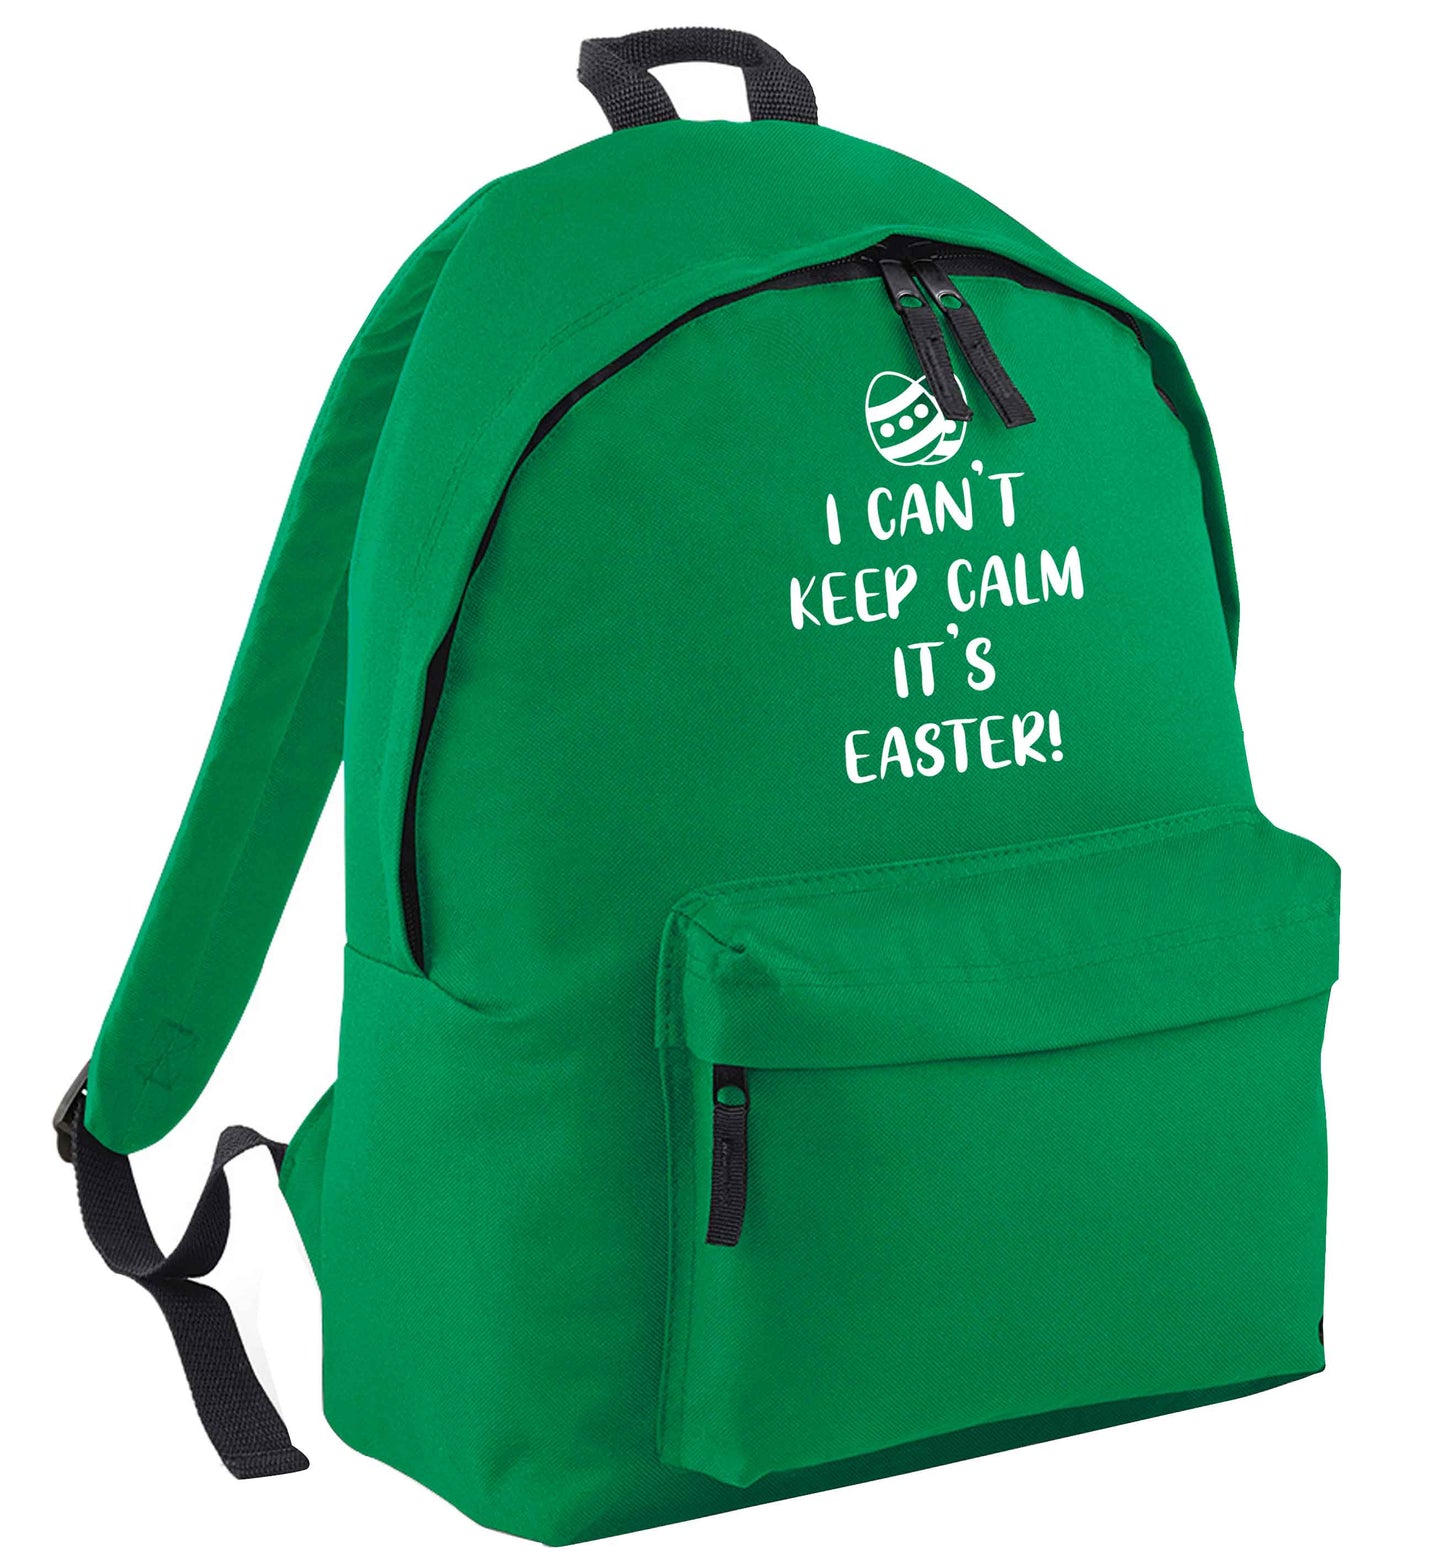 I can't keep calm it's Easter green adults backpack